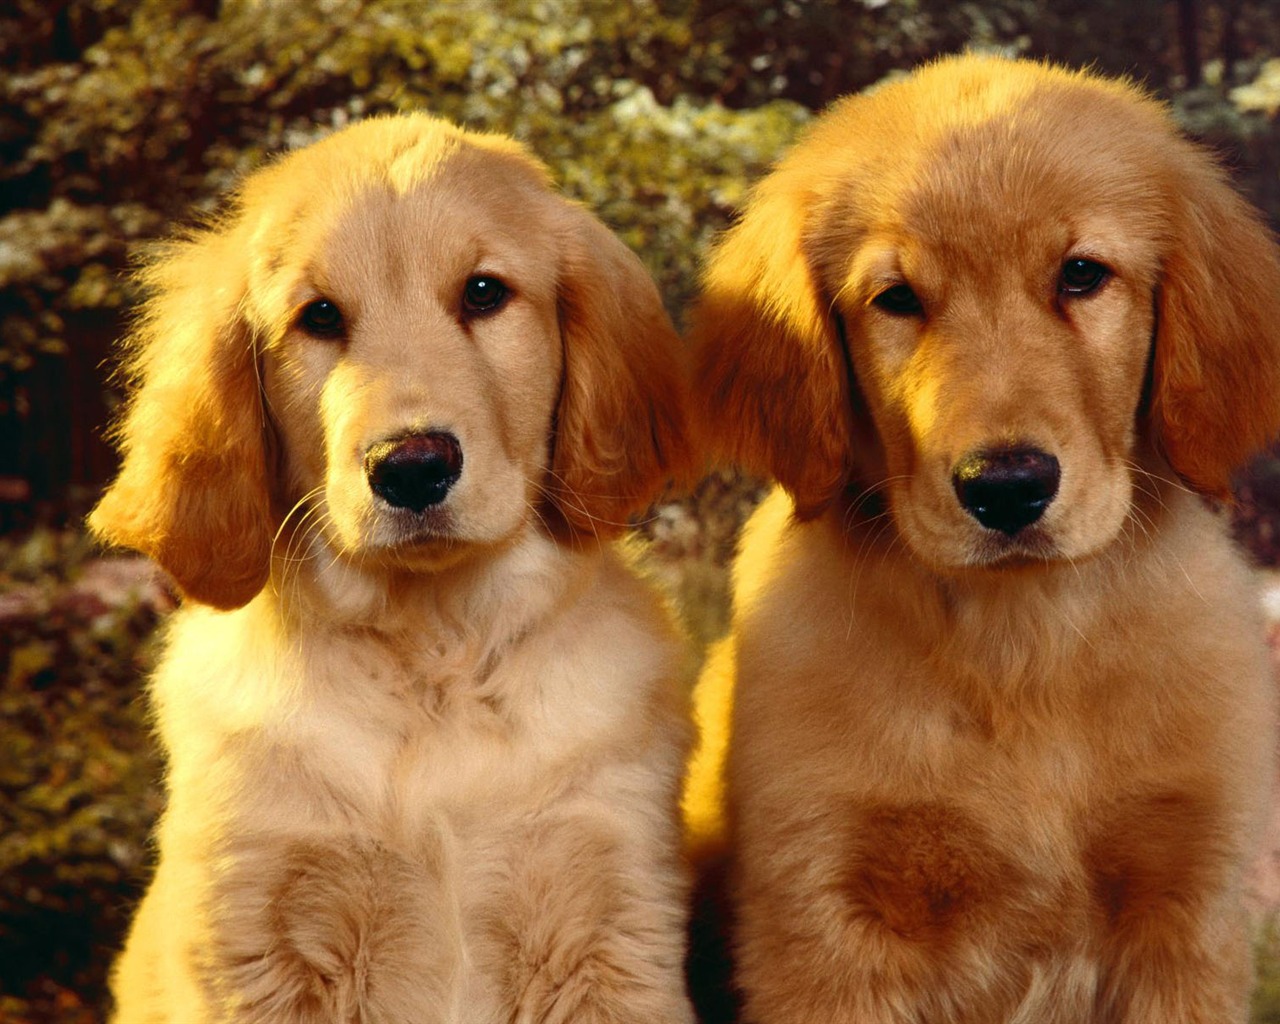 Puppy Photo HD wallpapers (2) #1 - 1280x1024